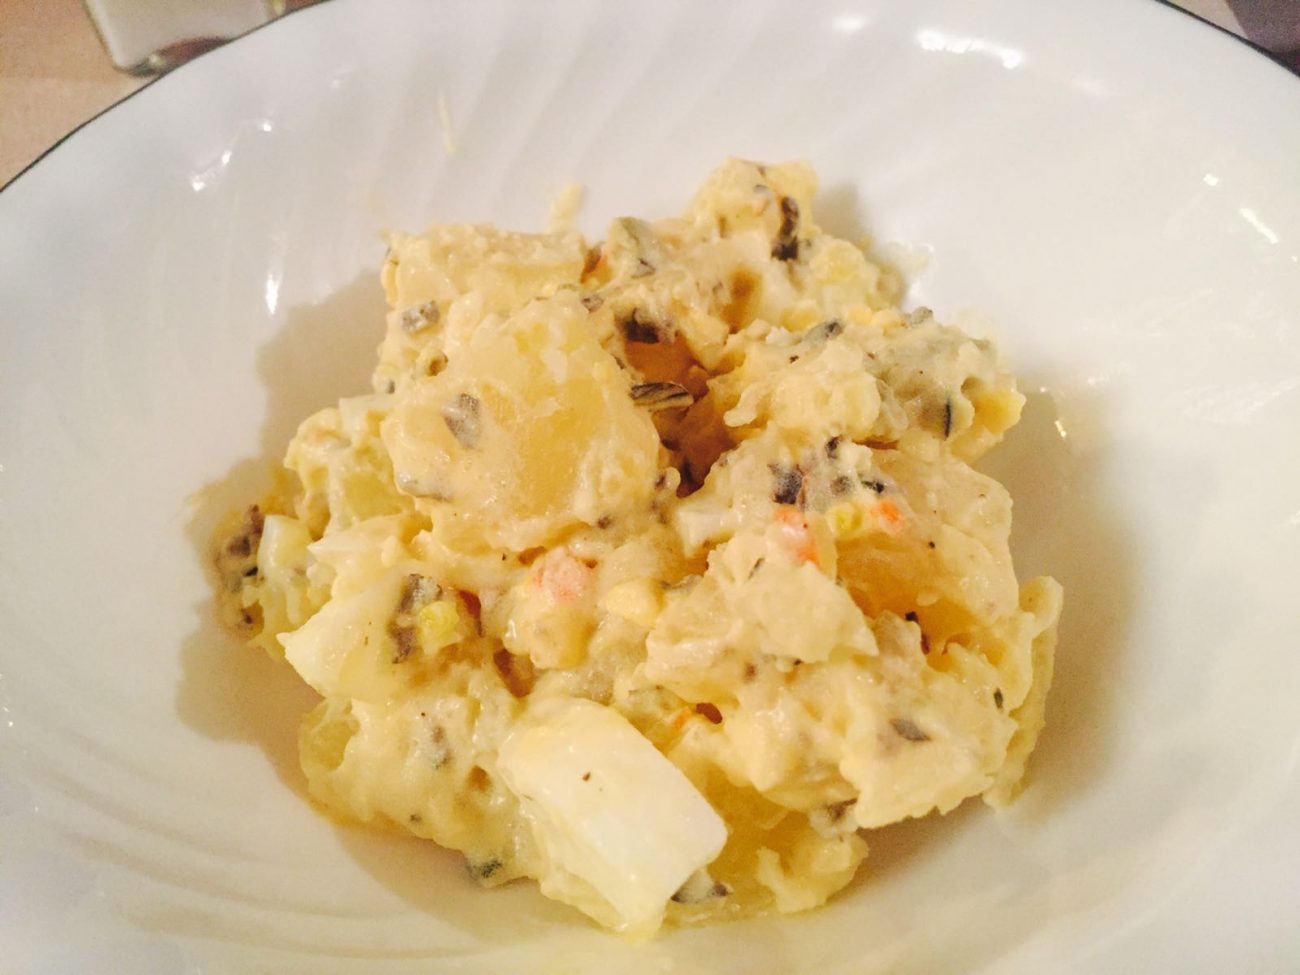 Mother-In-Law’s Potato Salad